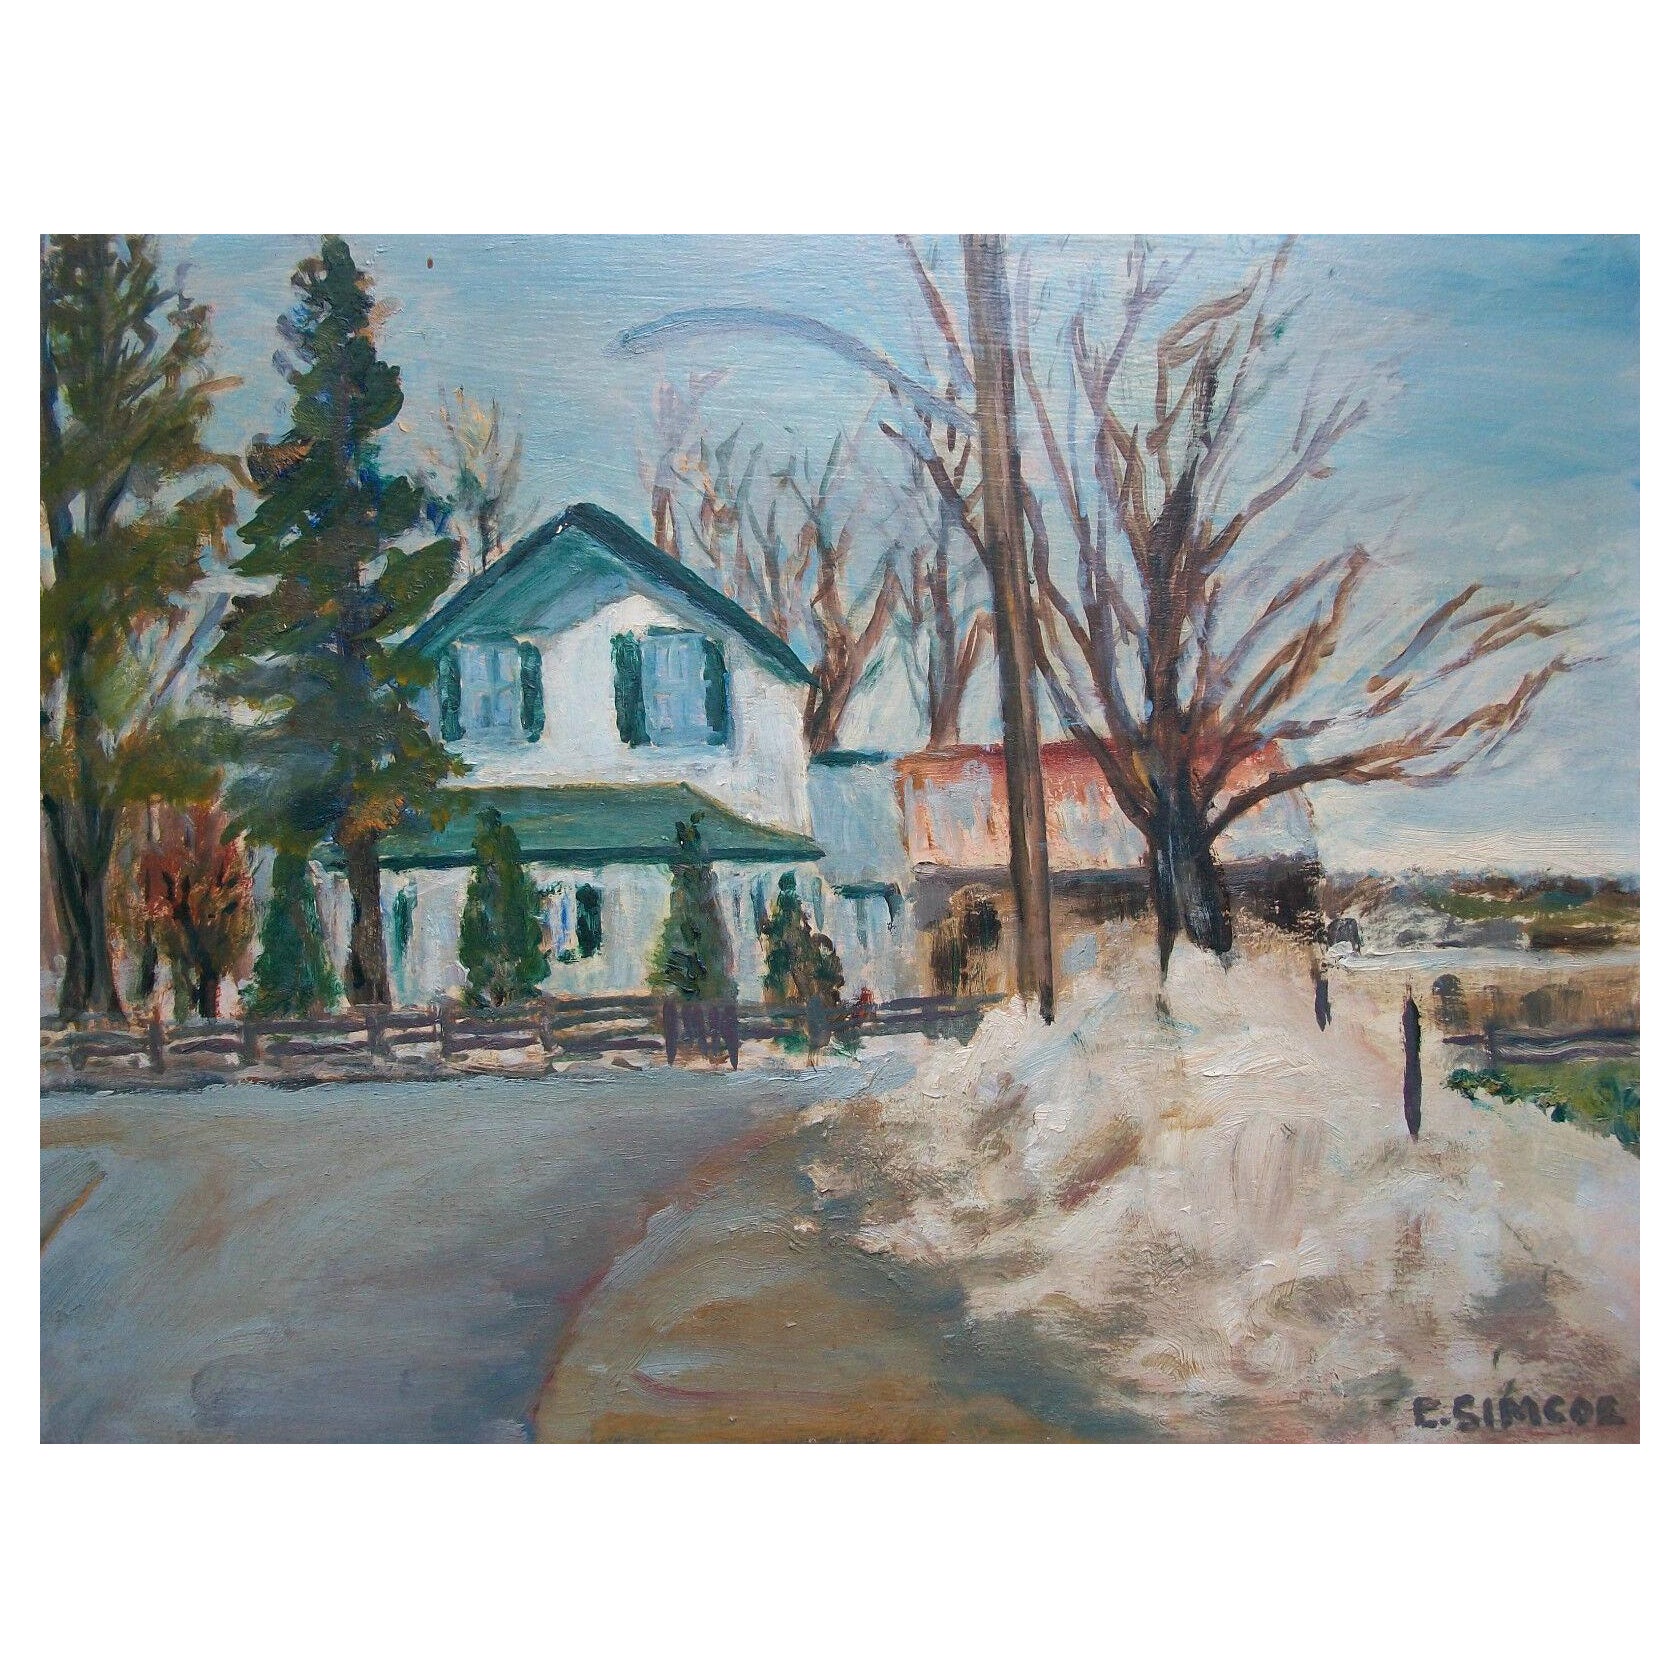 E. SIMCOE - Vintage Oil Painting on Panel - Unframed - Canada - Mid 20th Century